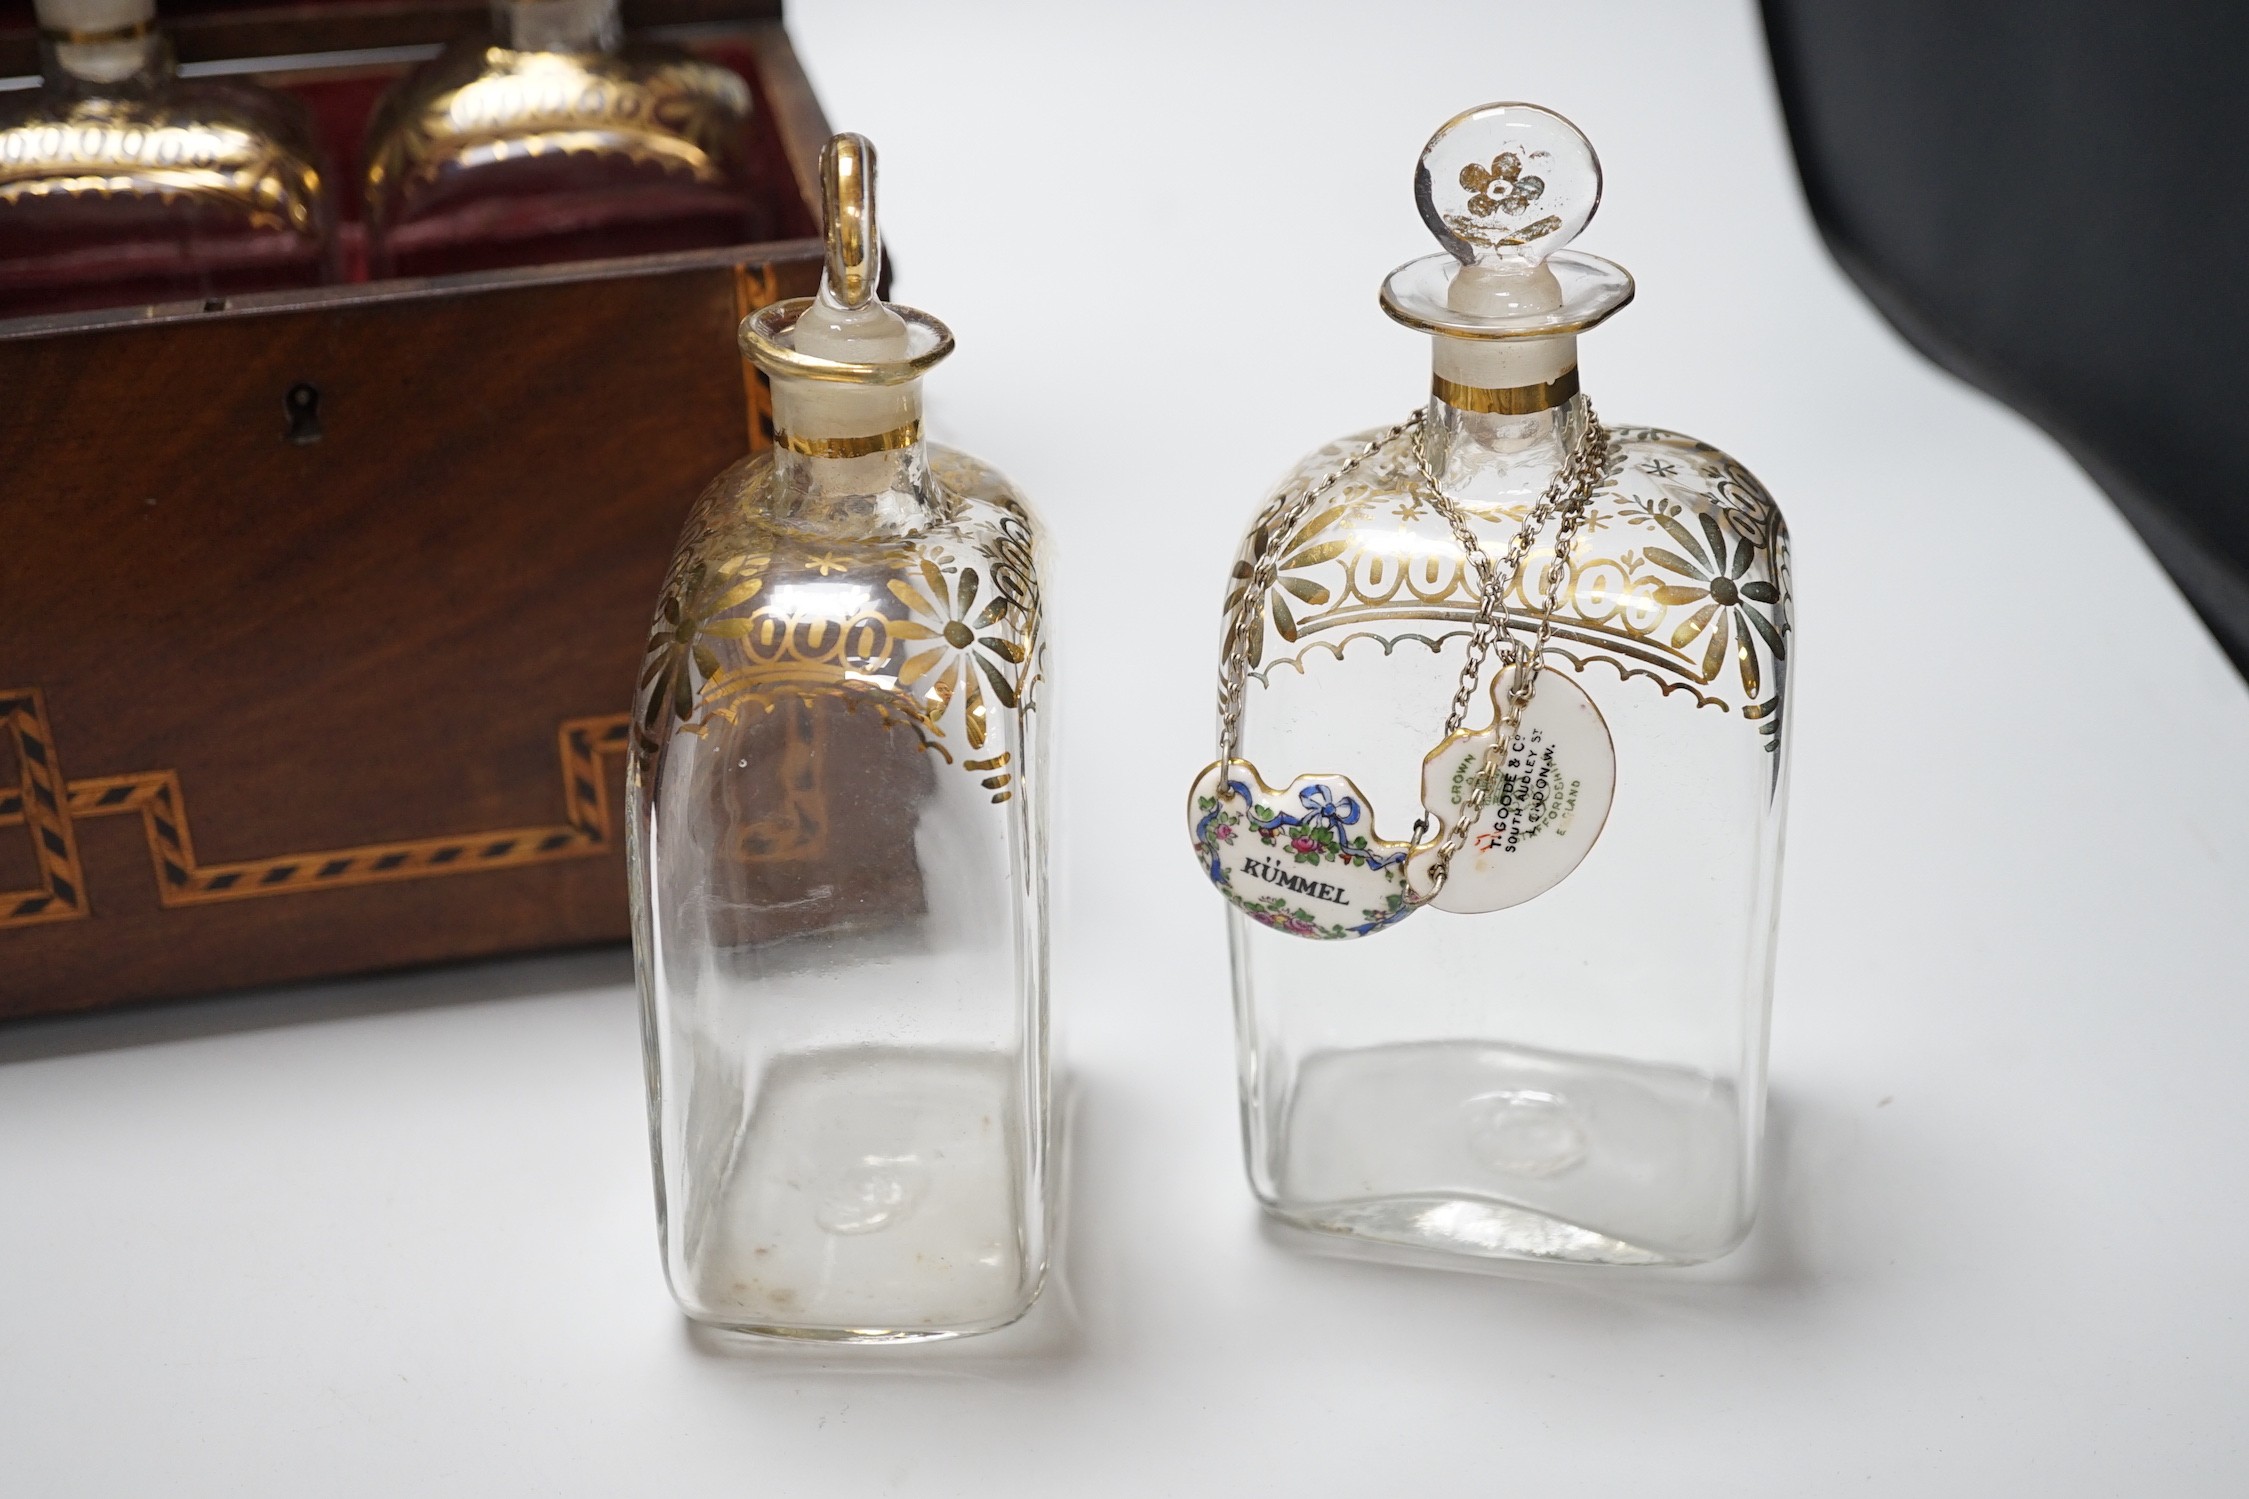 A George III inlaid mahogany decanter set with four gilt decorated decanters and two T.Goode & Co. enamelled wine labels, ‘BRANDY’ and ‘KÜMMEL’. 21cm tall